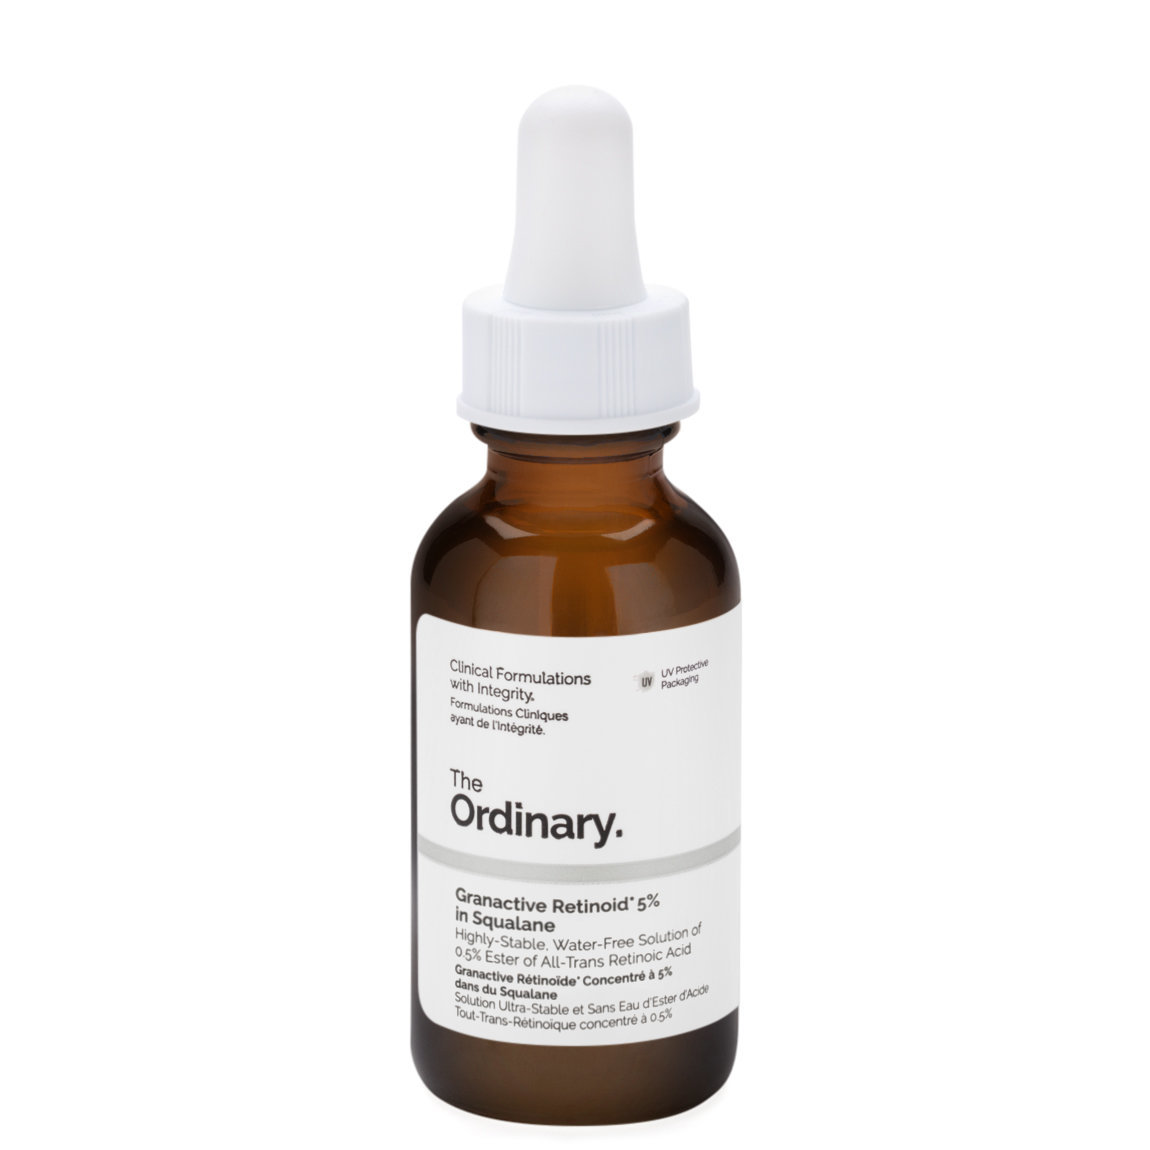 The Ordinary. Granactive Retinoid 5% in Squalane alternative view 1 - product swatch.